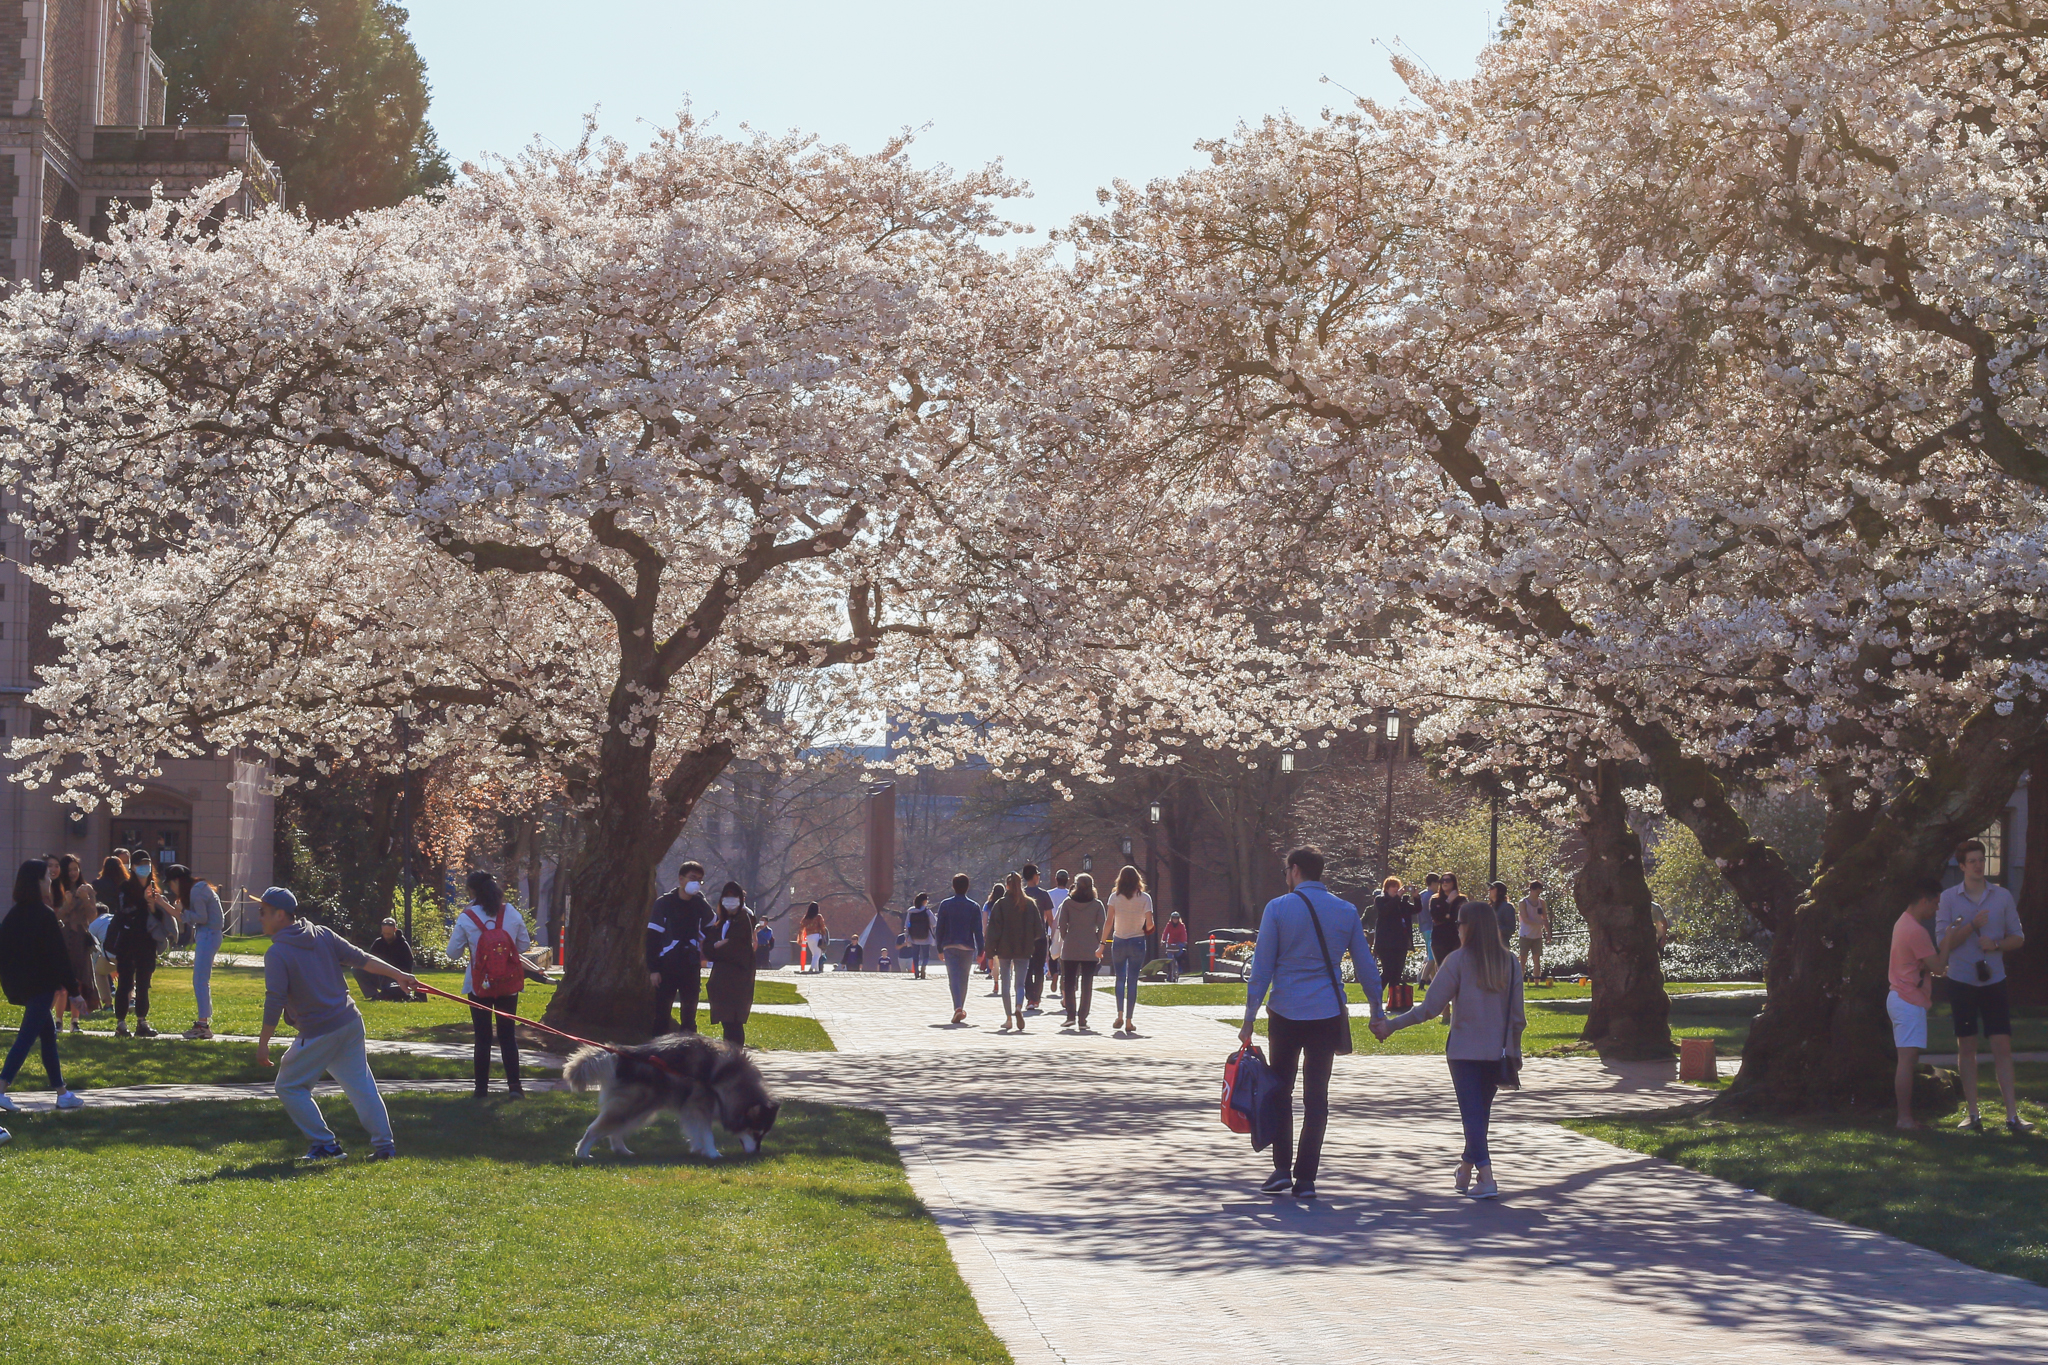 A sun-lit walkway with cherry trees in bloom on either side. A group of people mingle under the cherry trees.